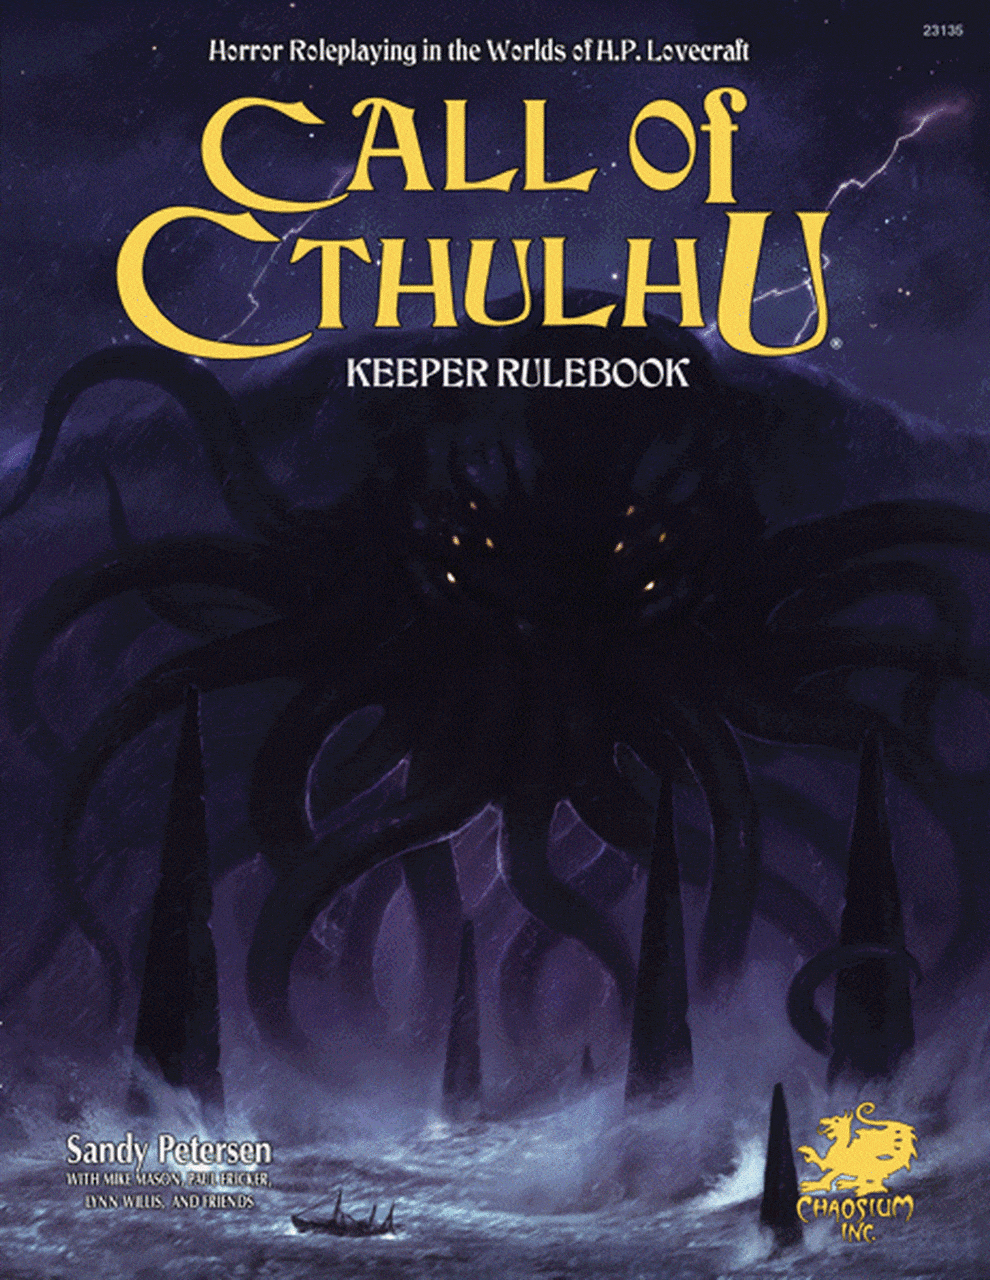 Call of Cthulhu: Keeper Rulebook (7th Edition) - gamers-guild-az-call-of-cthulhu-call-of-cthulhu-7th-edition-hardcover-gts-29261611925709